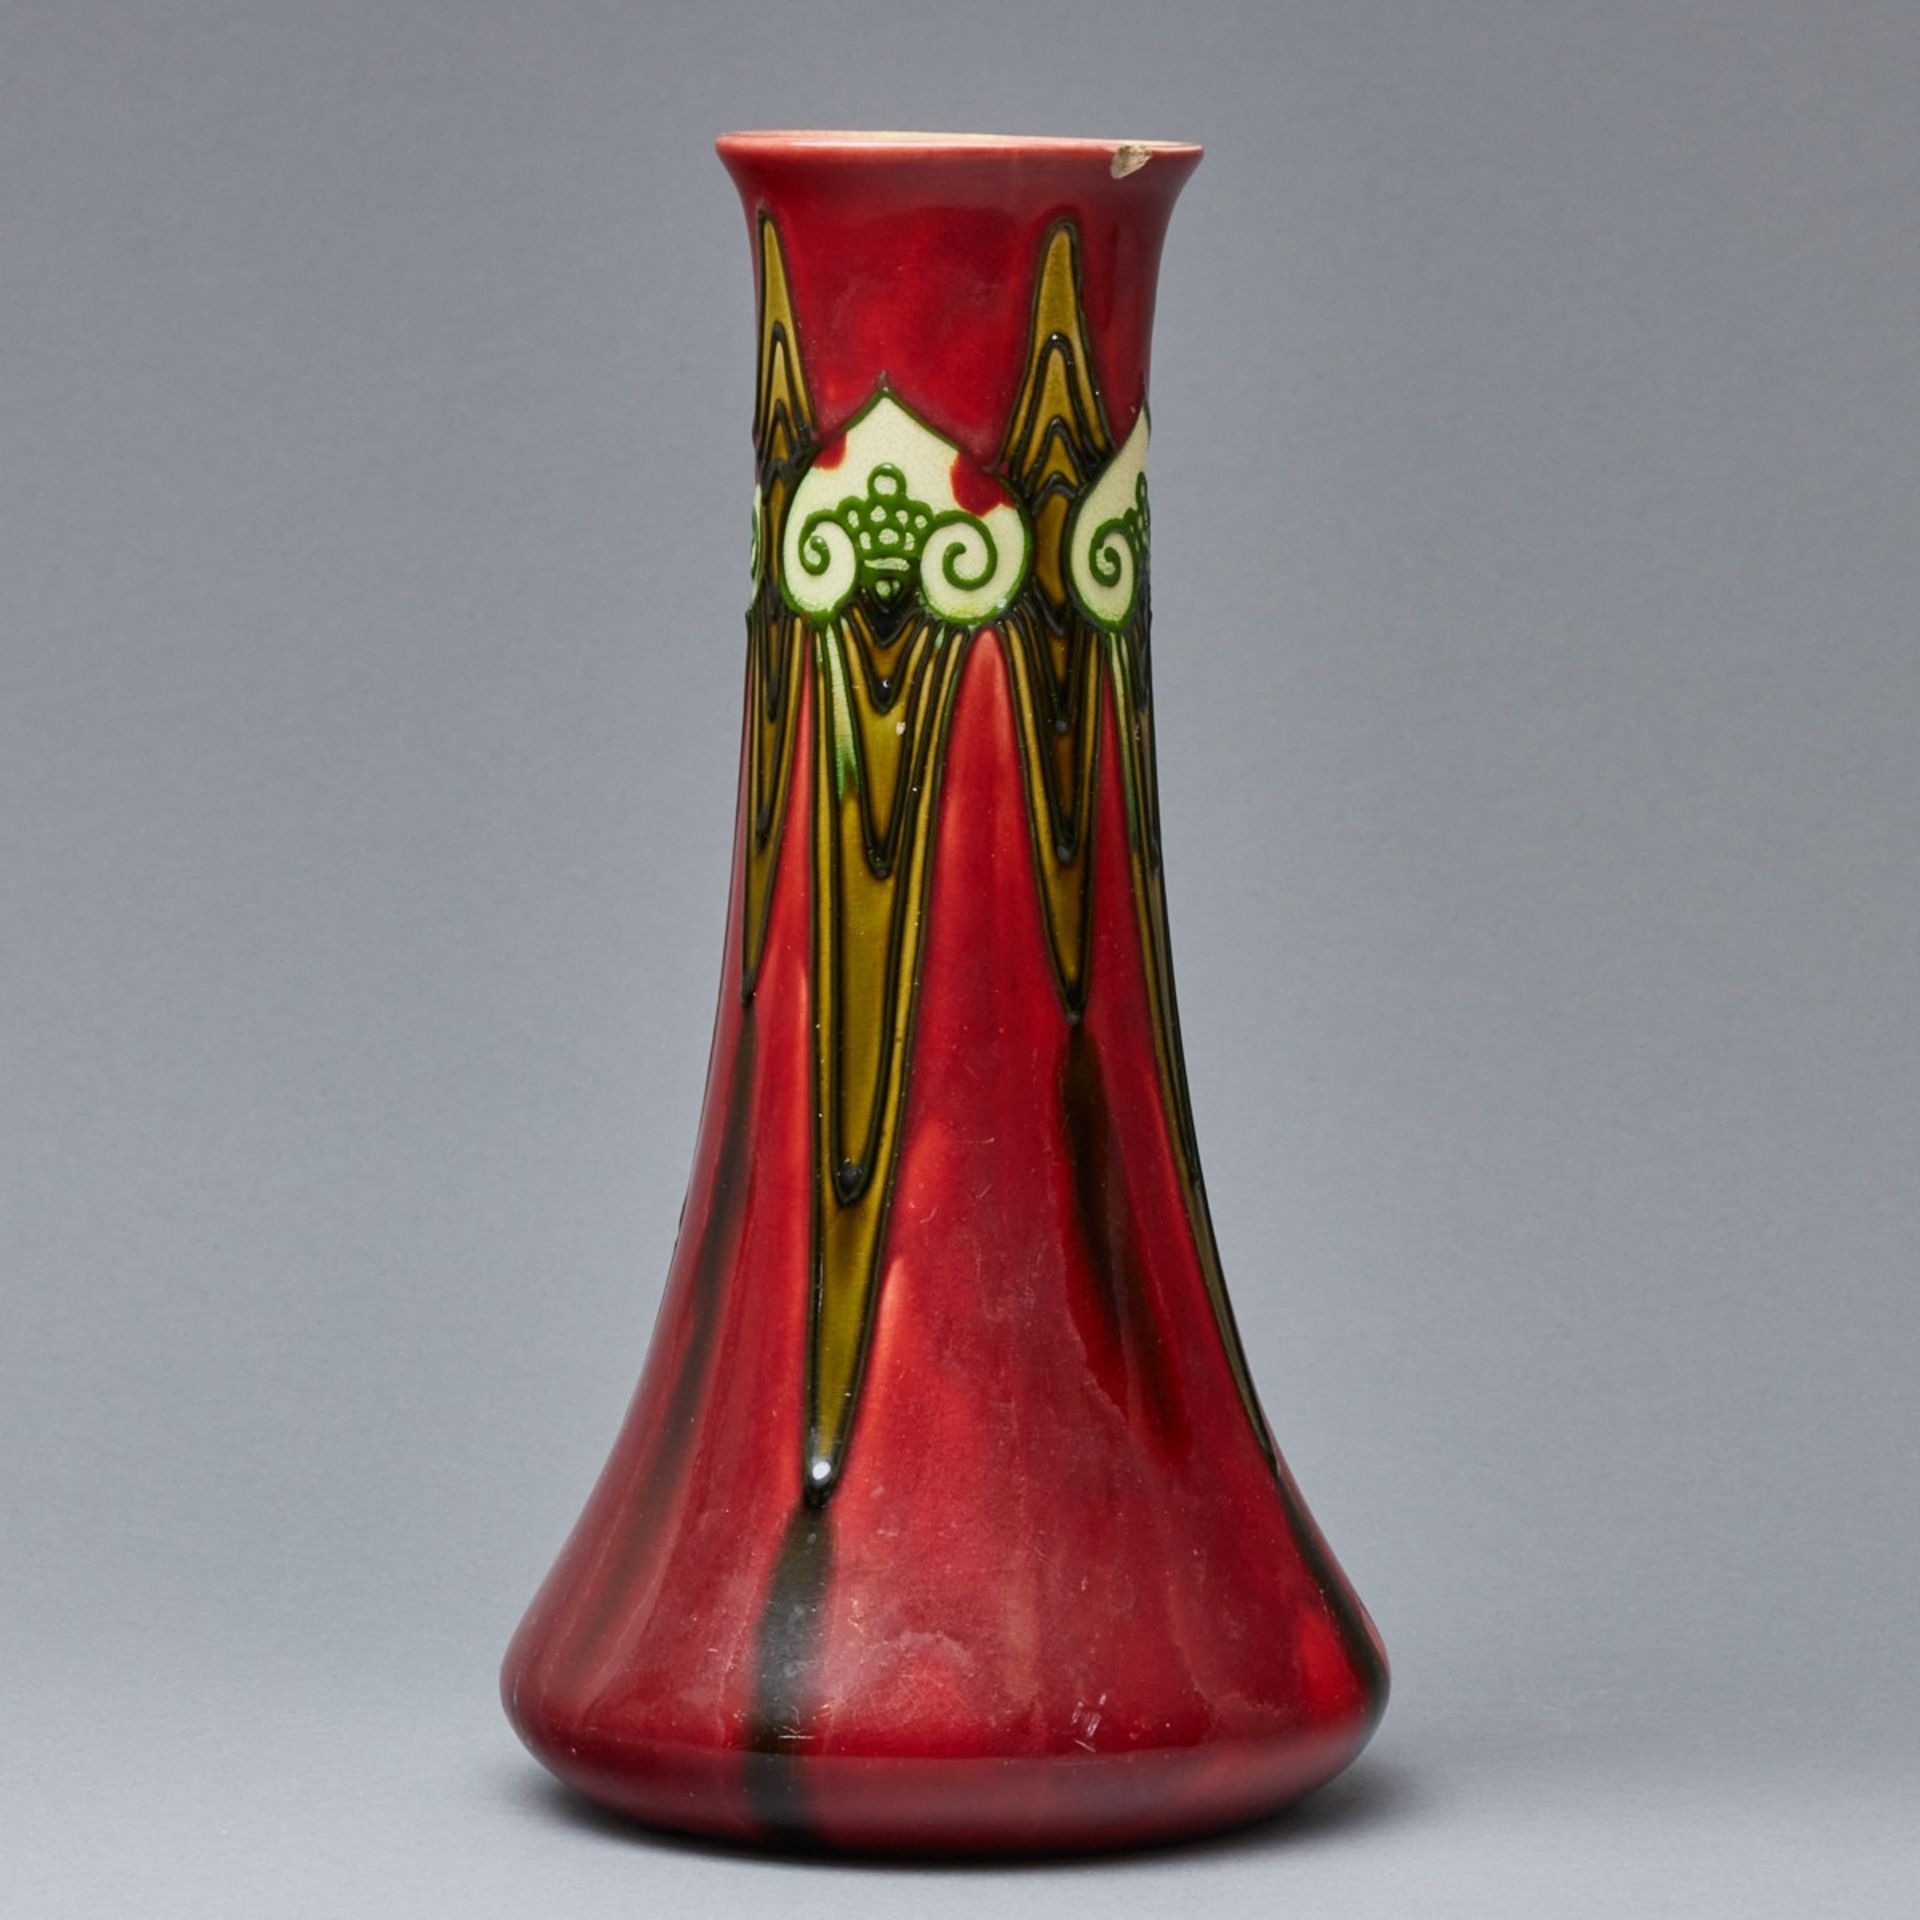 Vase Calla-Lilien-Blüten - Minton Secessionist Ware. Minton, Stoke-on-Trent in Staffordshire / Engl - Image 2 of 2